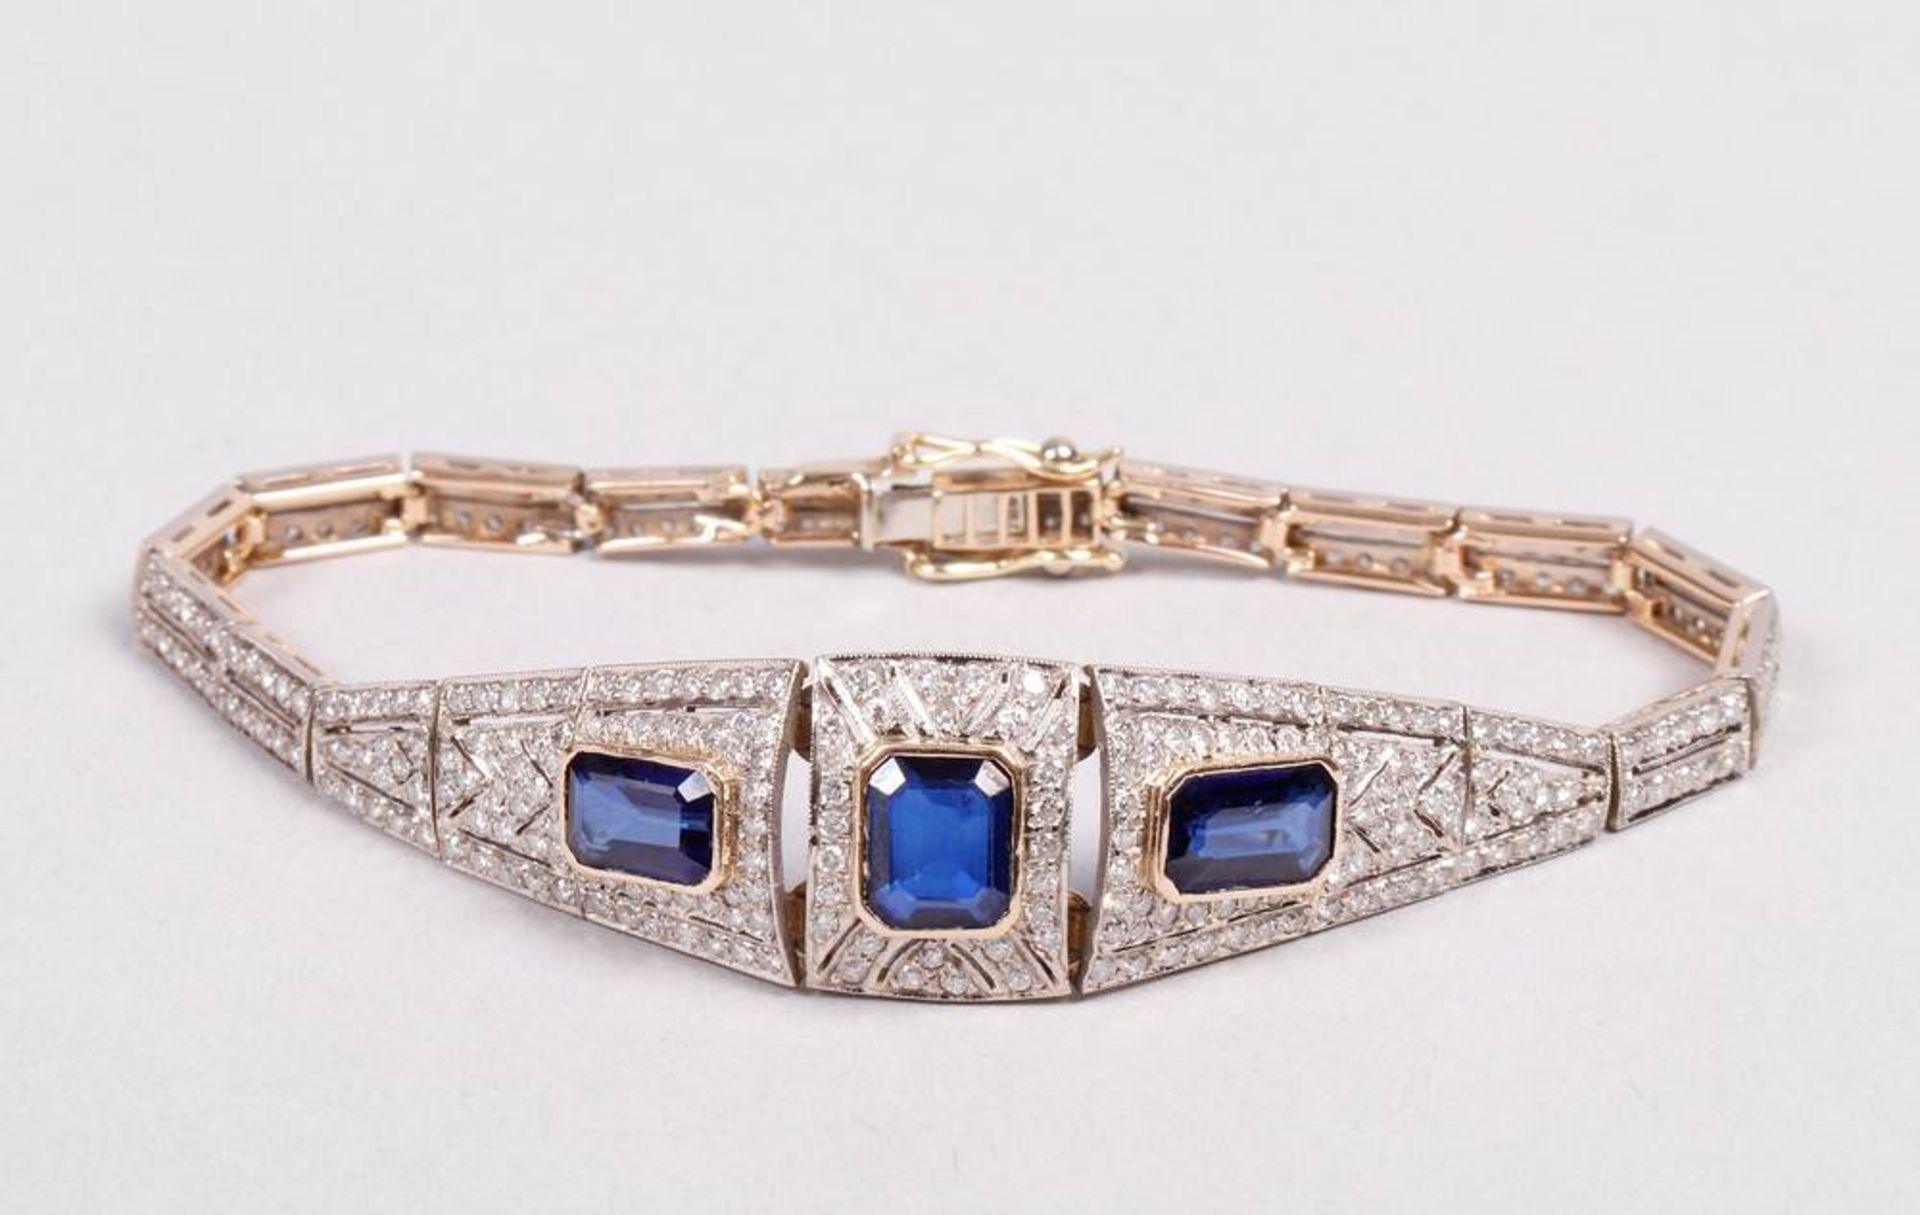 Art Deco bracelet with diamonds and sapphires, 750 gold - Image 3 of 4